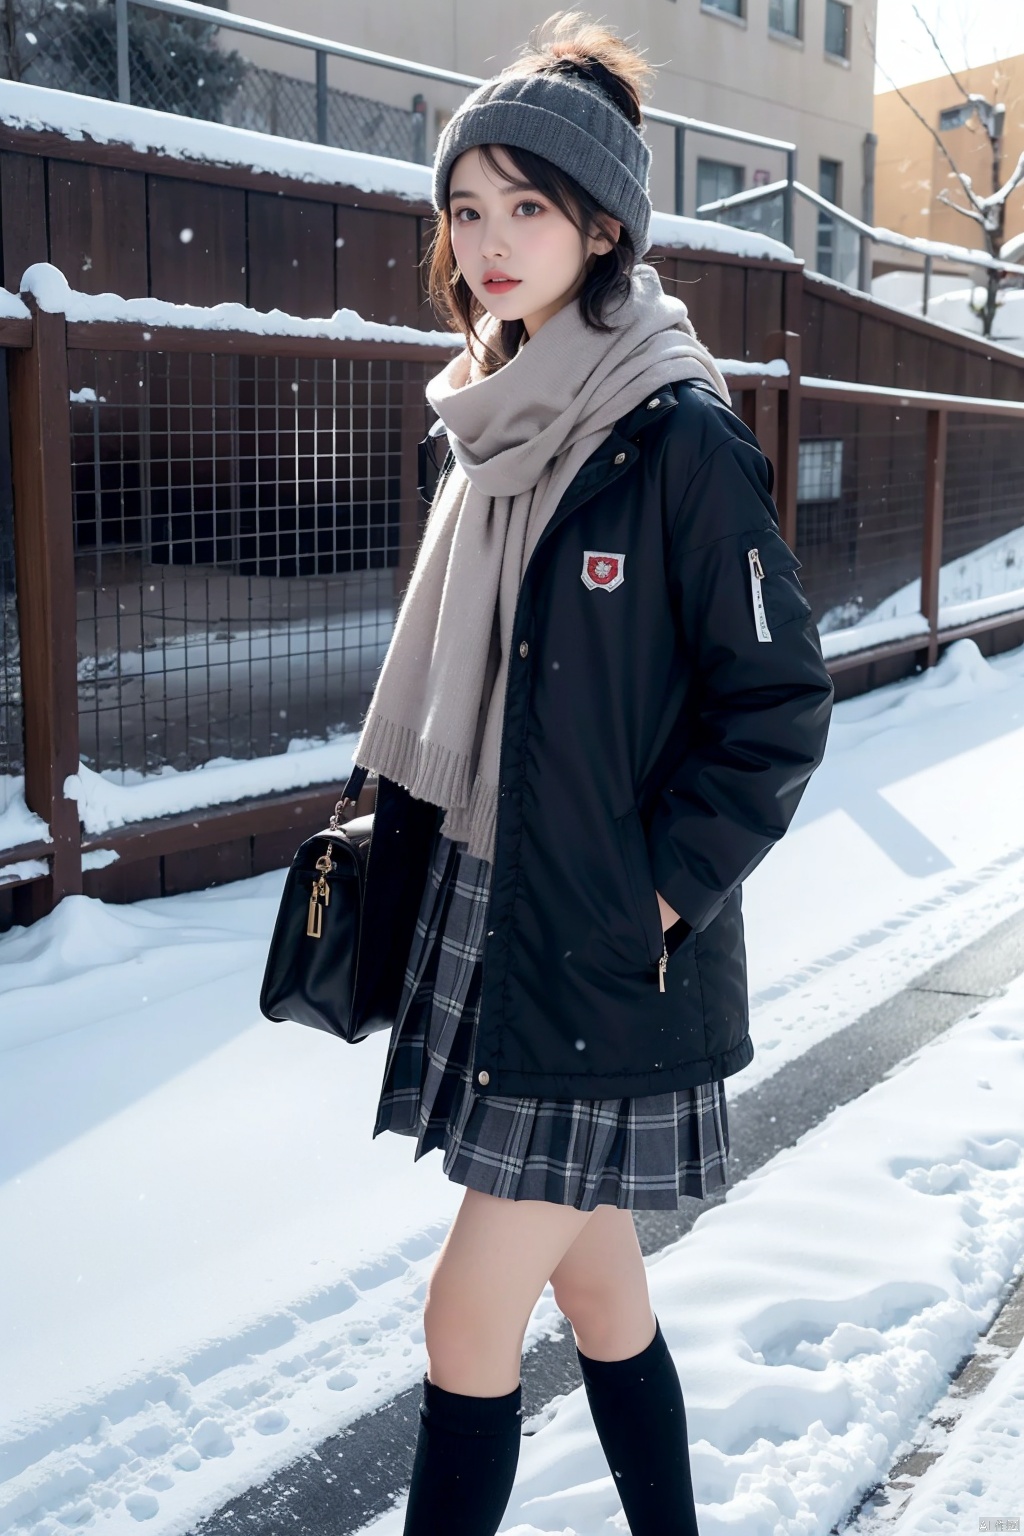 1girl,moyou,short hair,female student,wearing school uniform,plaid skirt,white stockings,black shots,thick coat,cotton-padded jacket,plaid scarf,small bag,on the way home,snow,snow,school gate,outdoor,